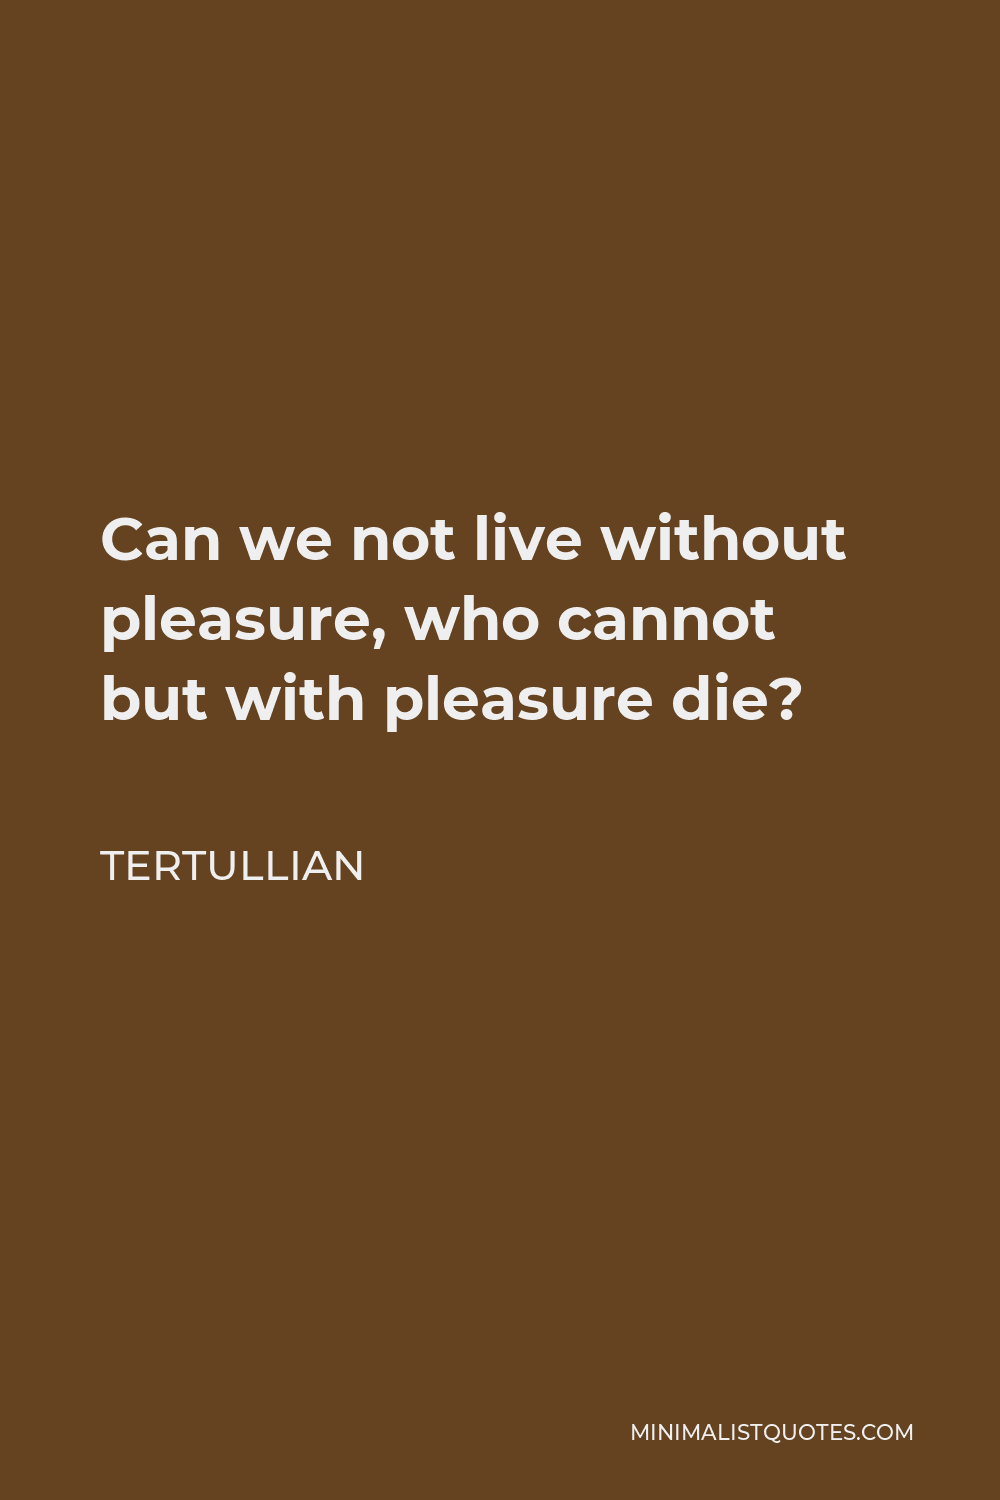 Tertullian Quote - Can we not live without pleasure, who cannot but with pleasure die?